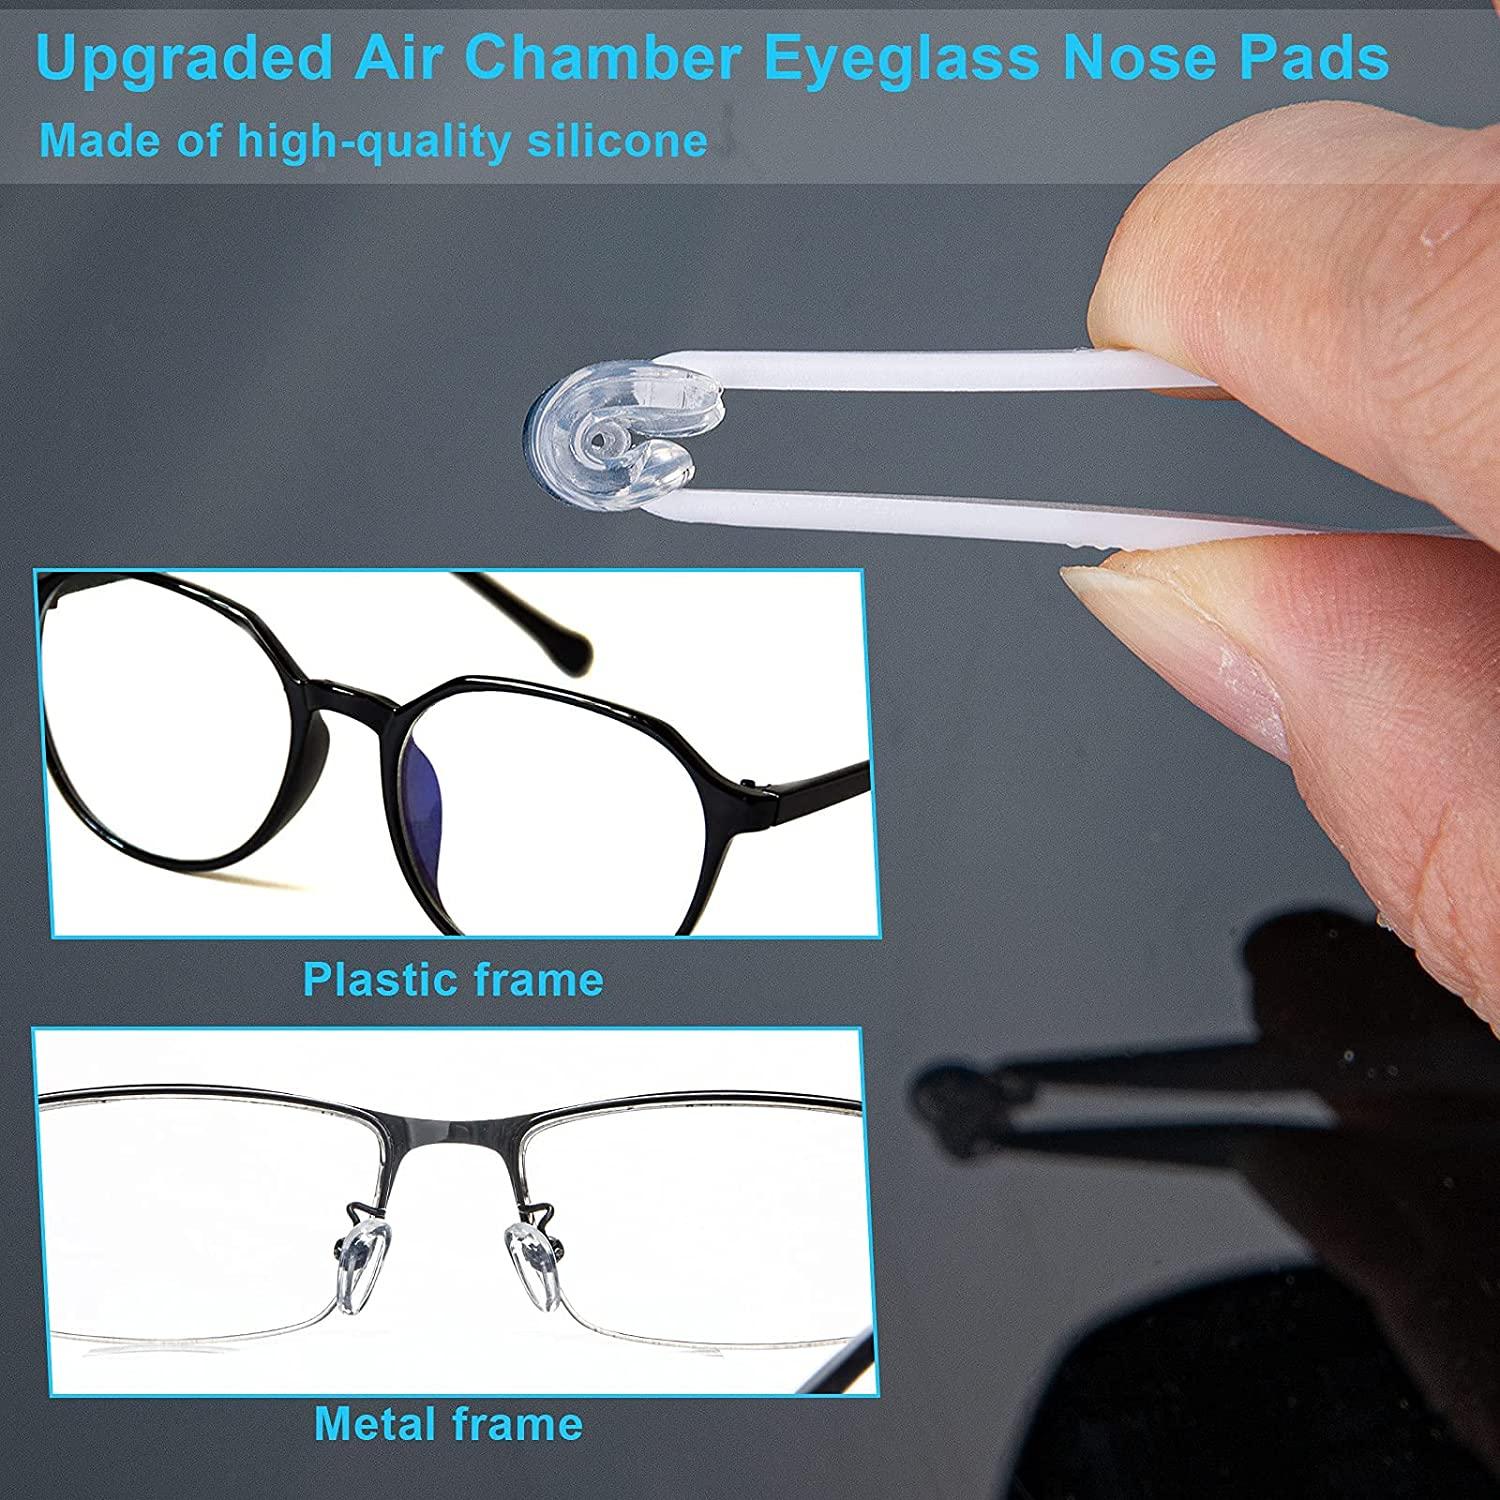 Eyeglasses Nose Pads, Upgraded Soft Silicone Air Chamber Nose Pads